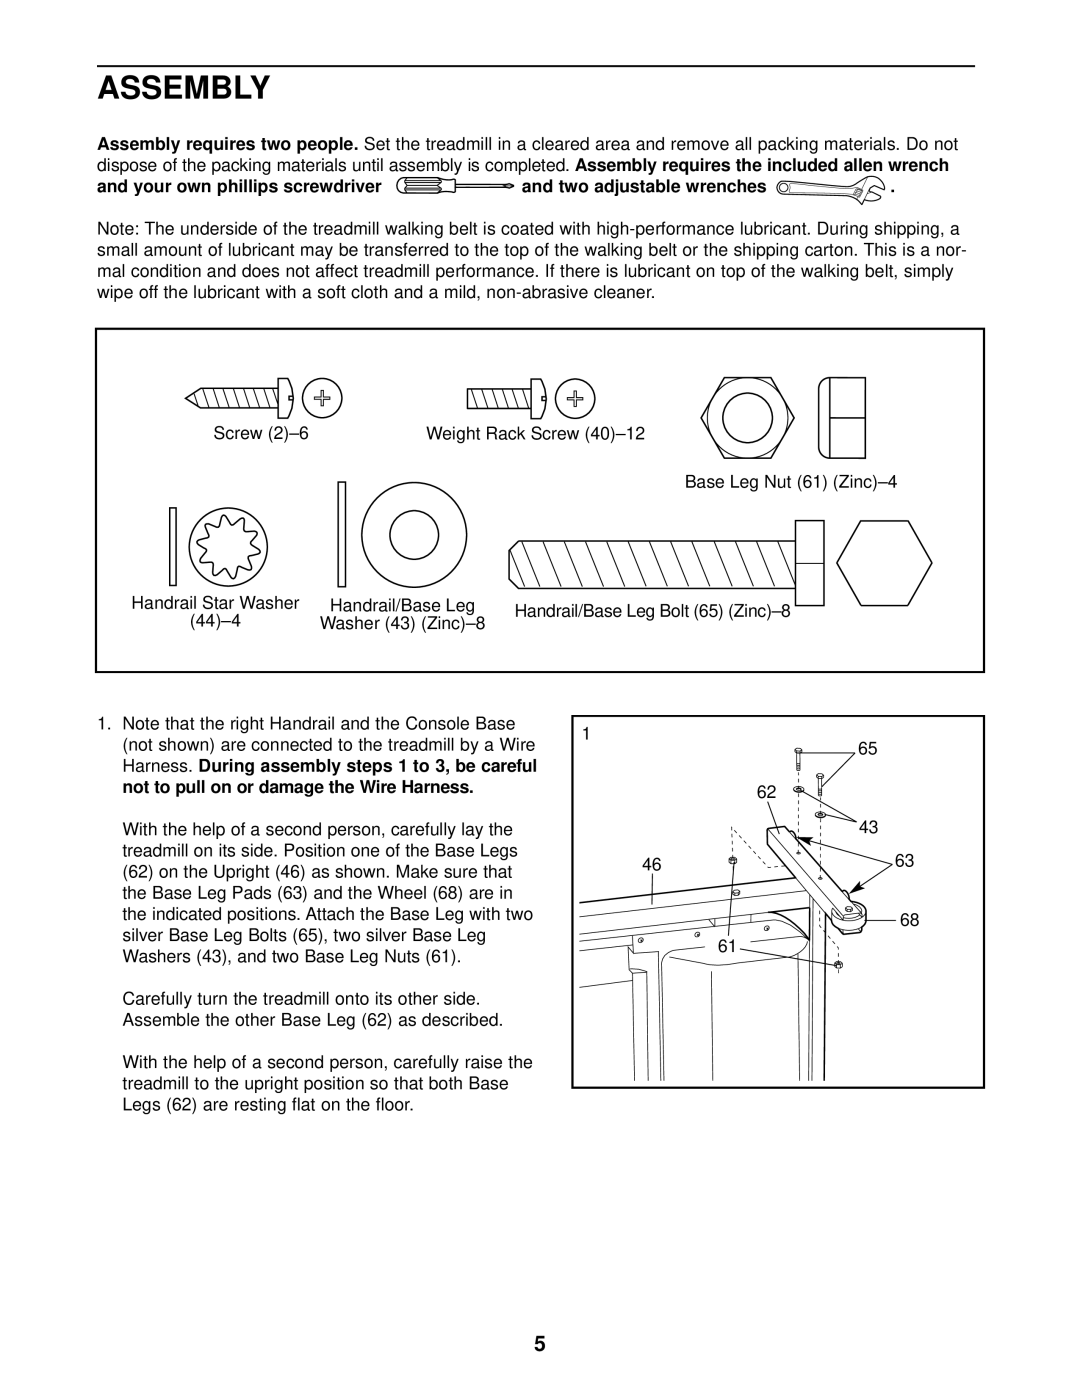 Weslo WCTL29200 user manual Assembly, and your own phillips screwdriver and two adjustable wrenches 